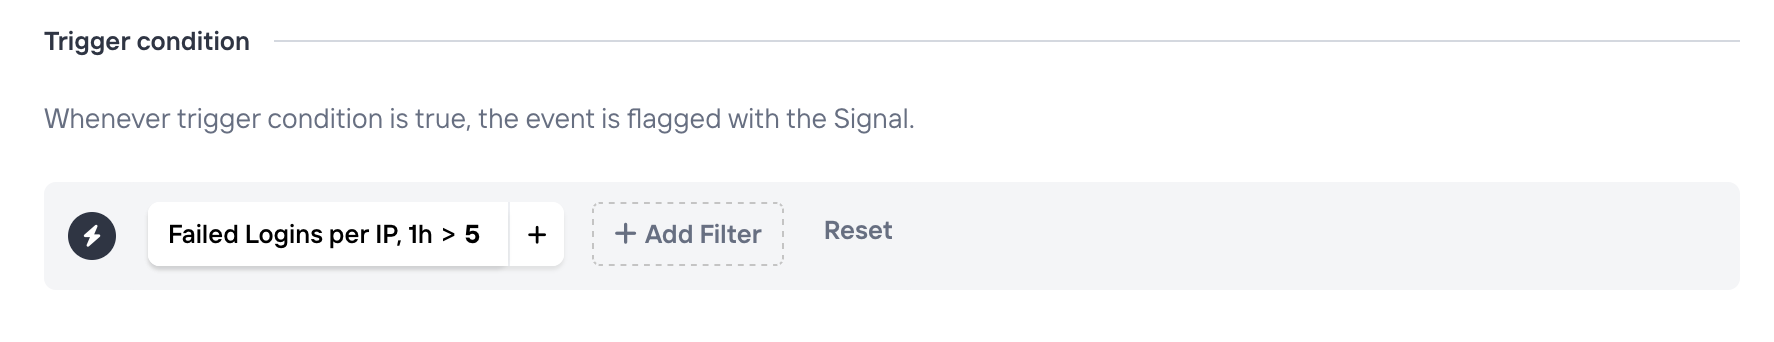 Metric in Custom Signal's trigger condition